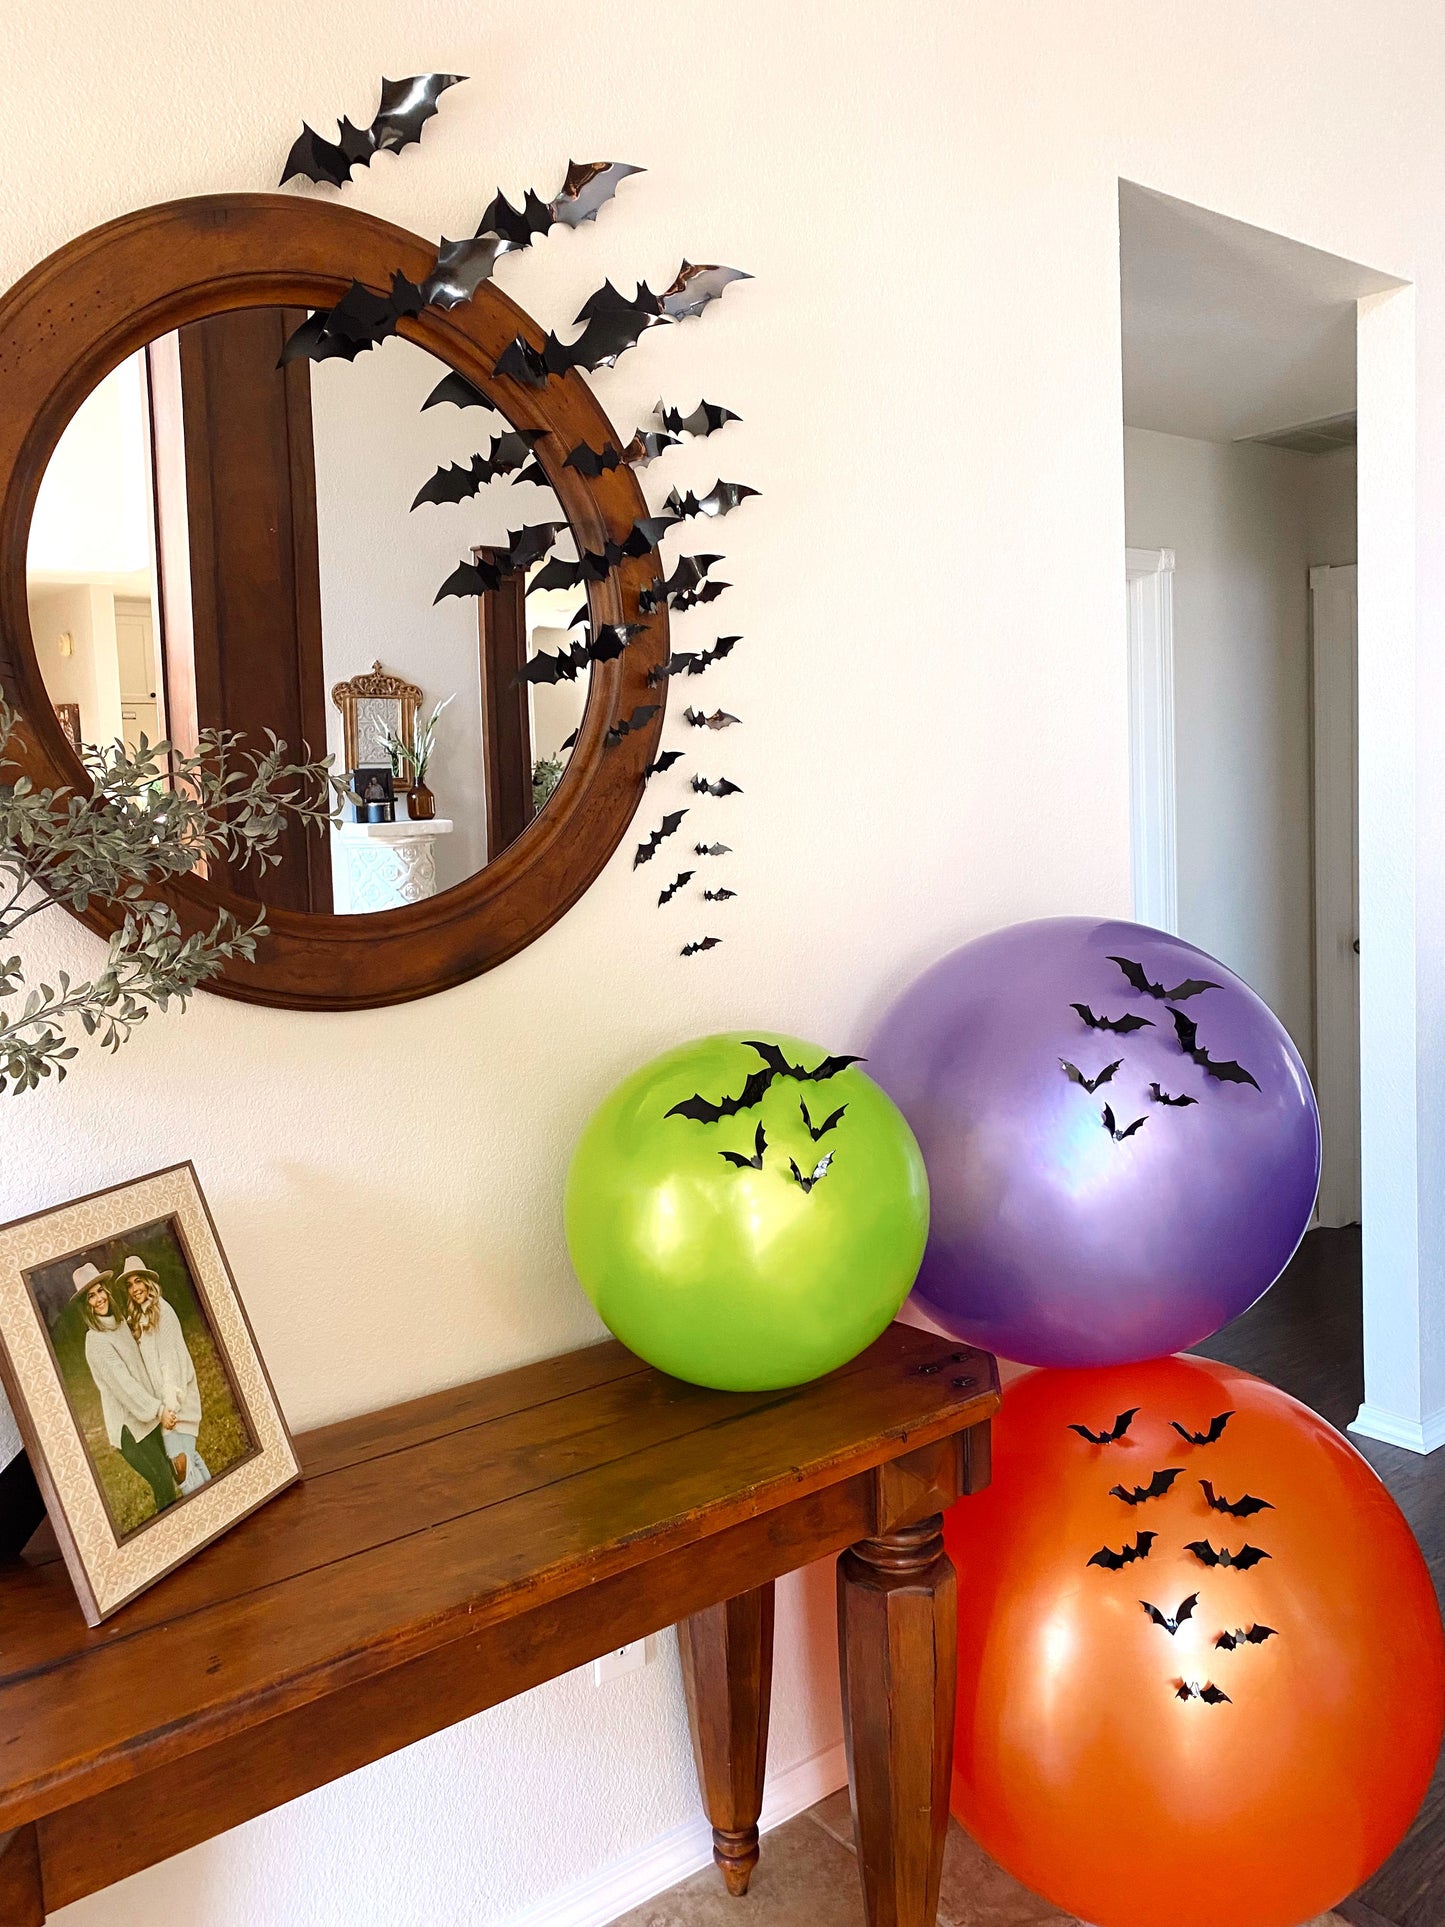 Holiball Life-size Inflatable Ornaments